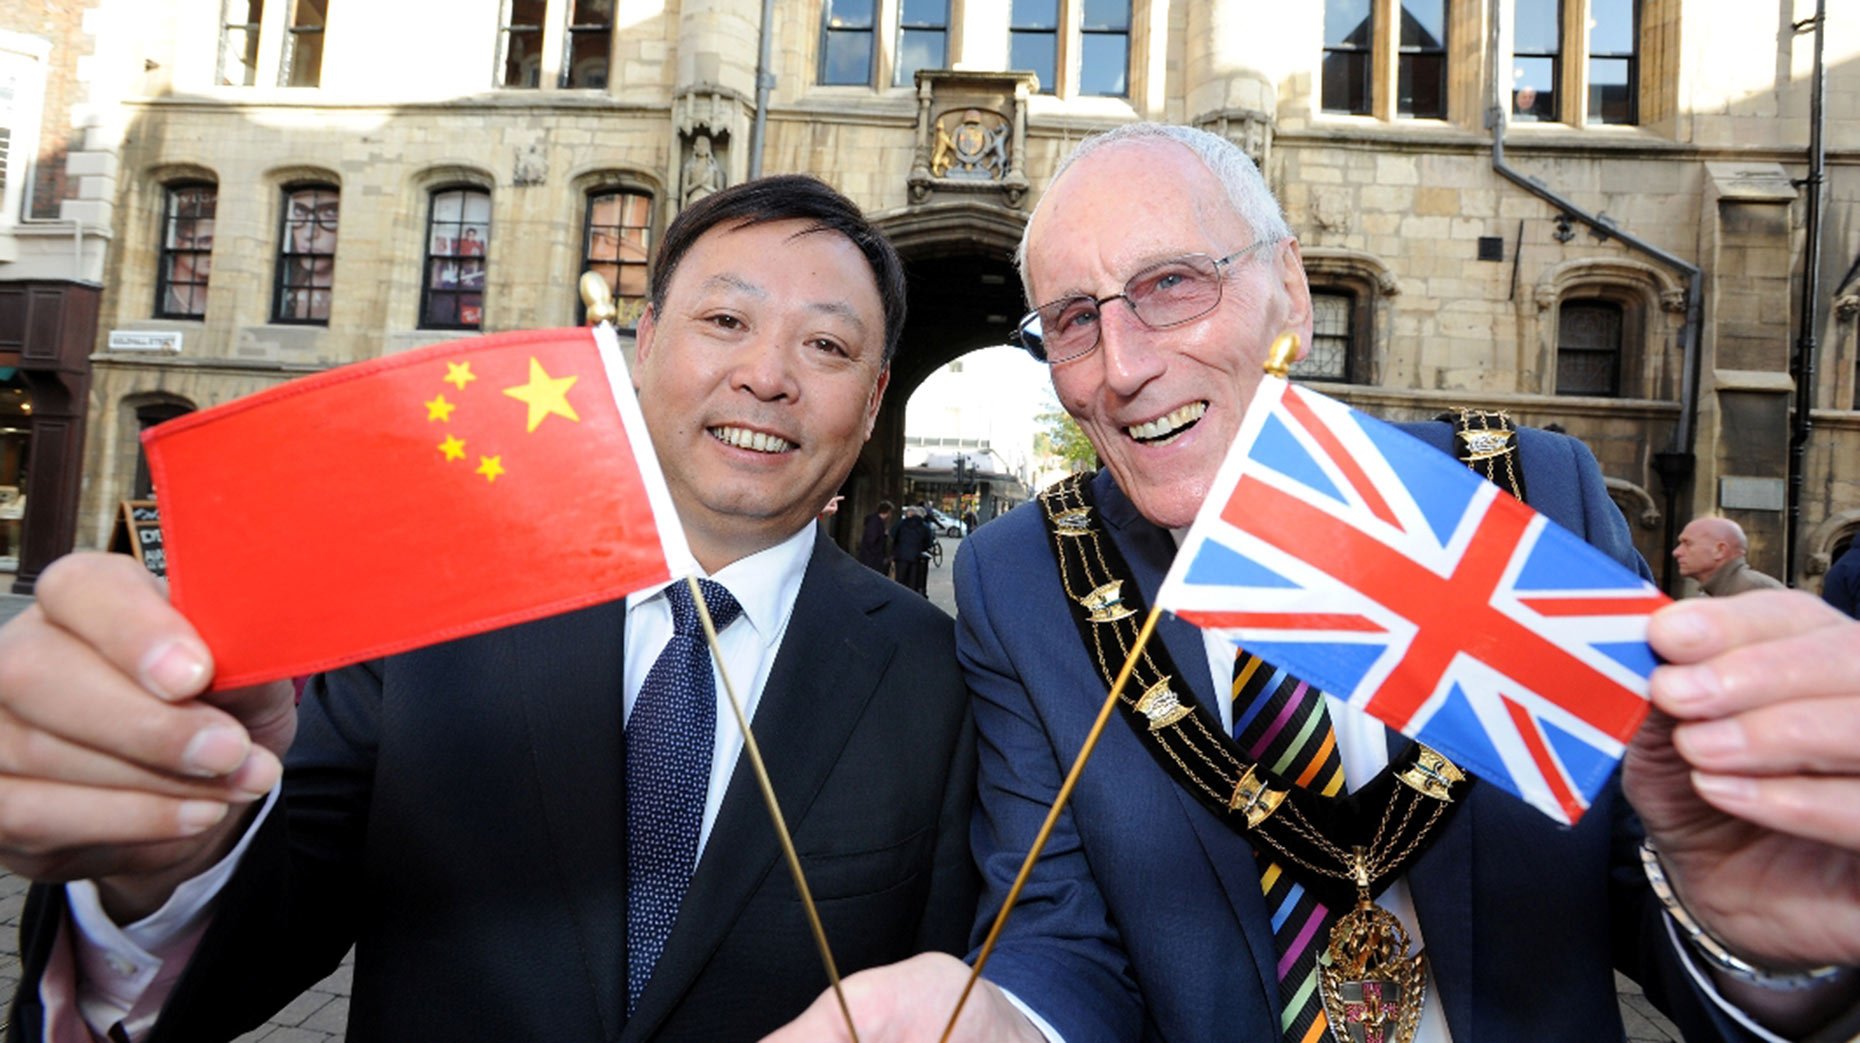 Mayor of Lincoln Brent Charlesworth celebrates signing the twinning agreement with the Mayor of Nanchang, Guo An.